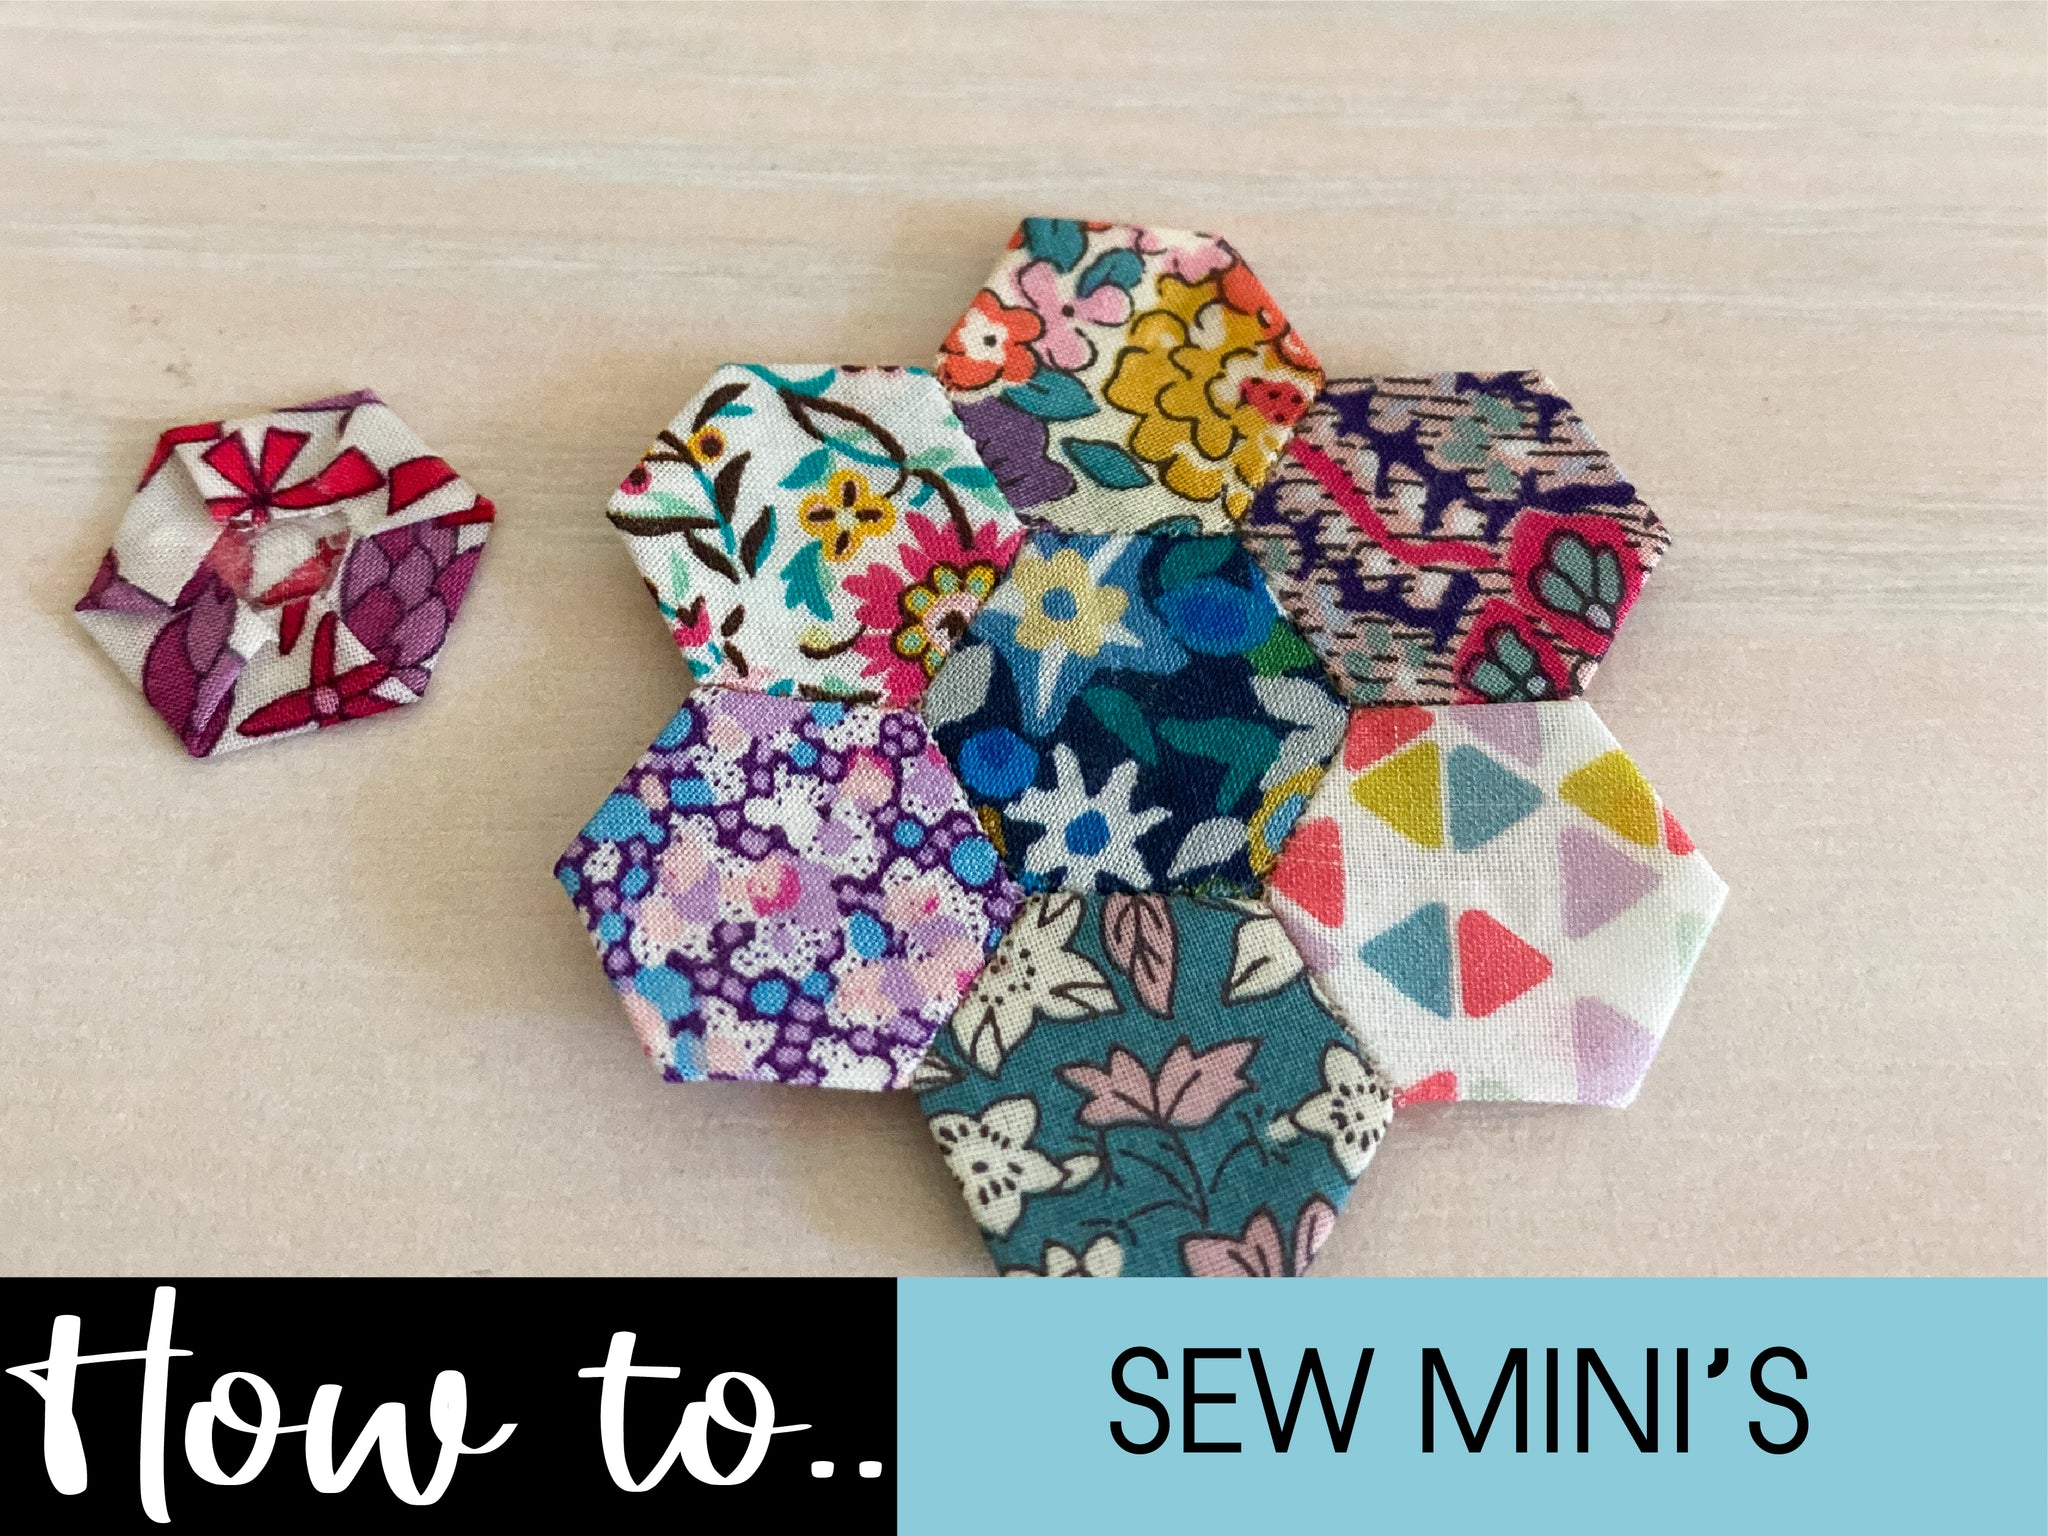 Sewing tiny pieces